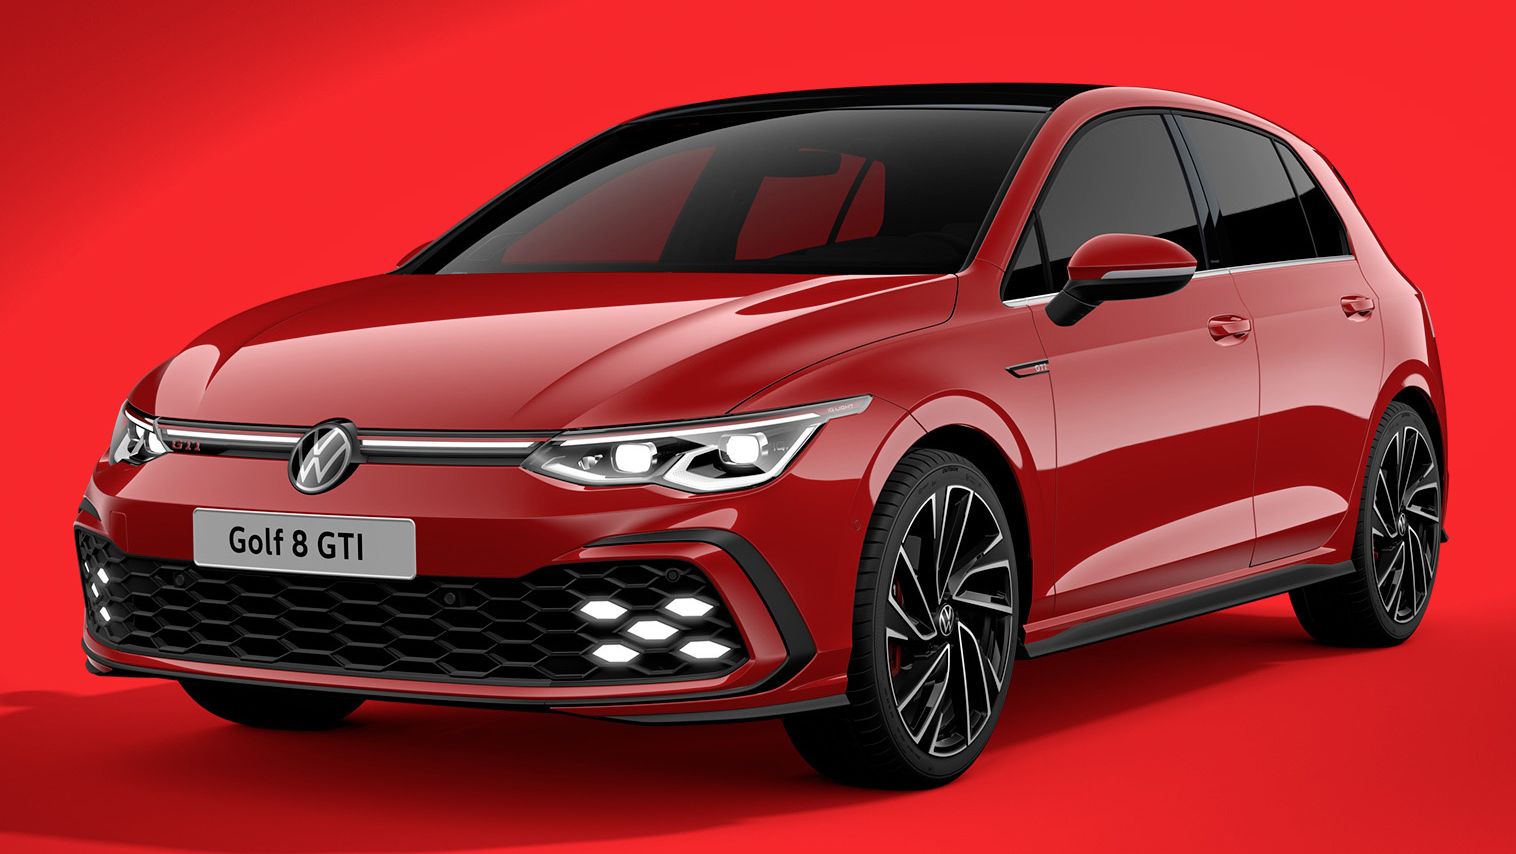 2019 Golf 8 Rendered In Line With VW's Latest Models